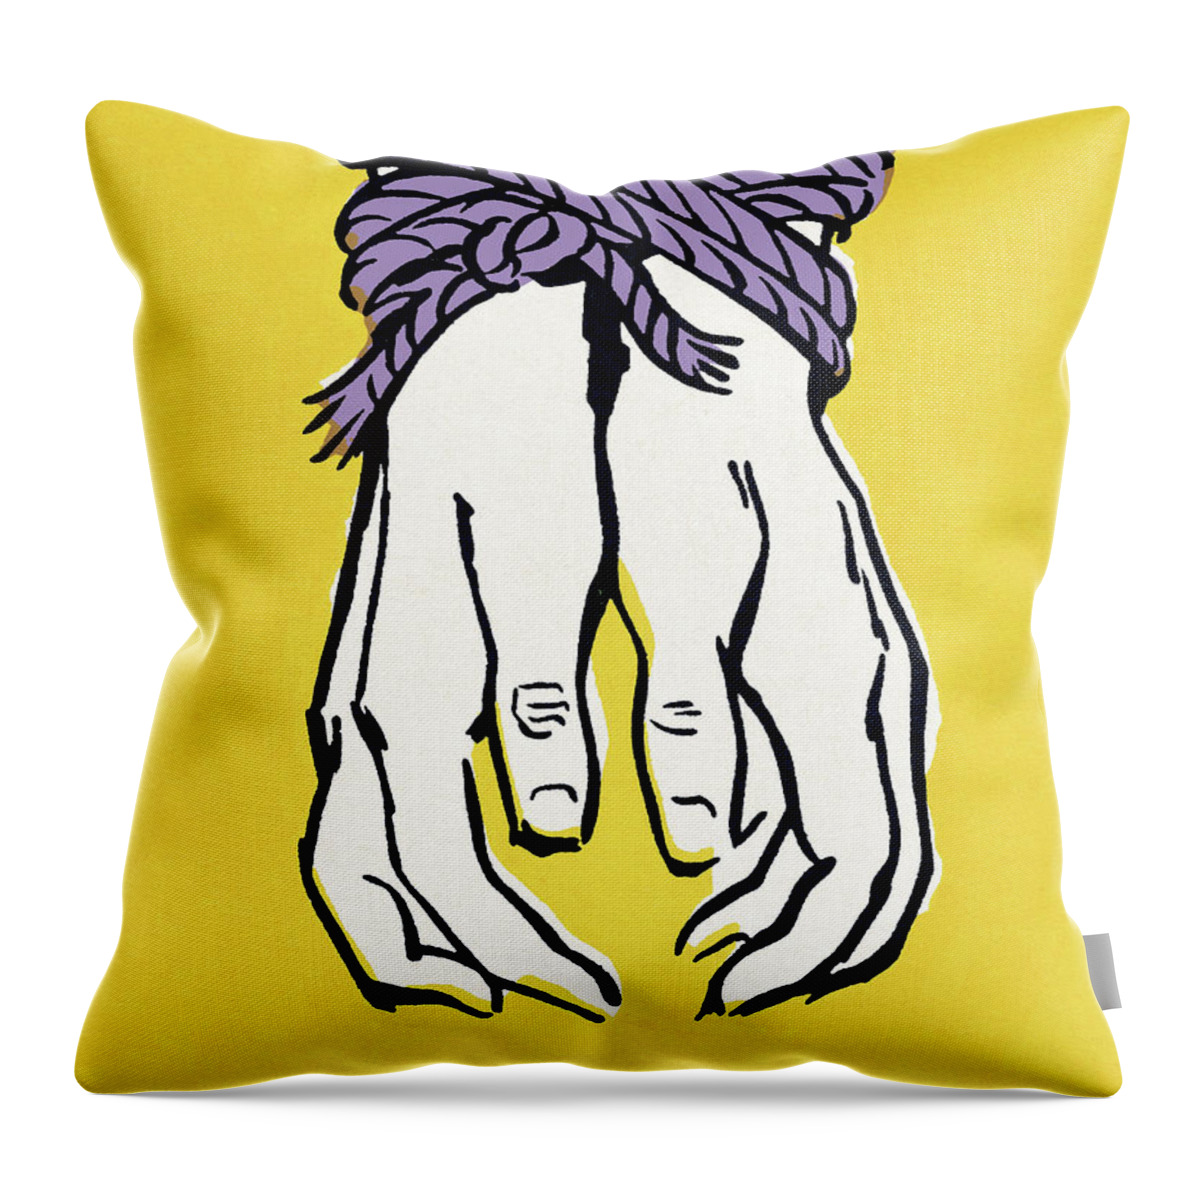 Abduction Throw Pillow featuring the drawing Hands Tied Together by CSA Images